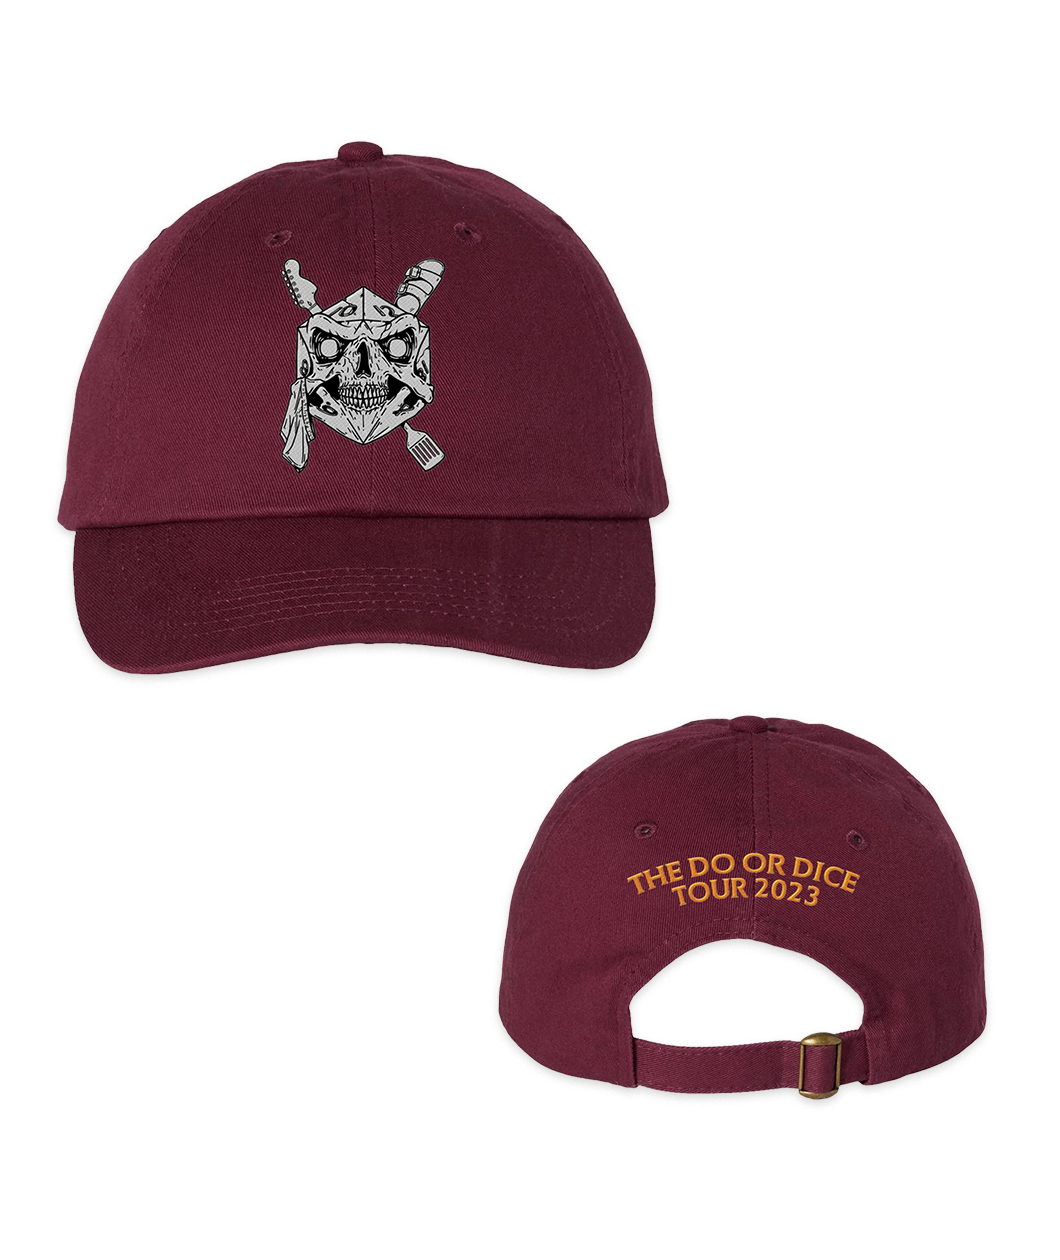 Burgundy dad hat with D20 skull illustration printed in black and white front and center. On the back the words THE DO OR DICE TOUR 2023 are embroidered in orange over the gap.